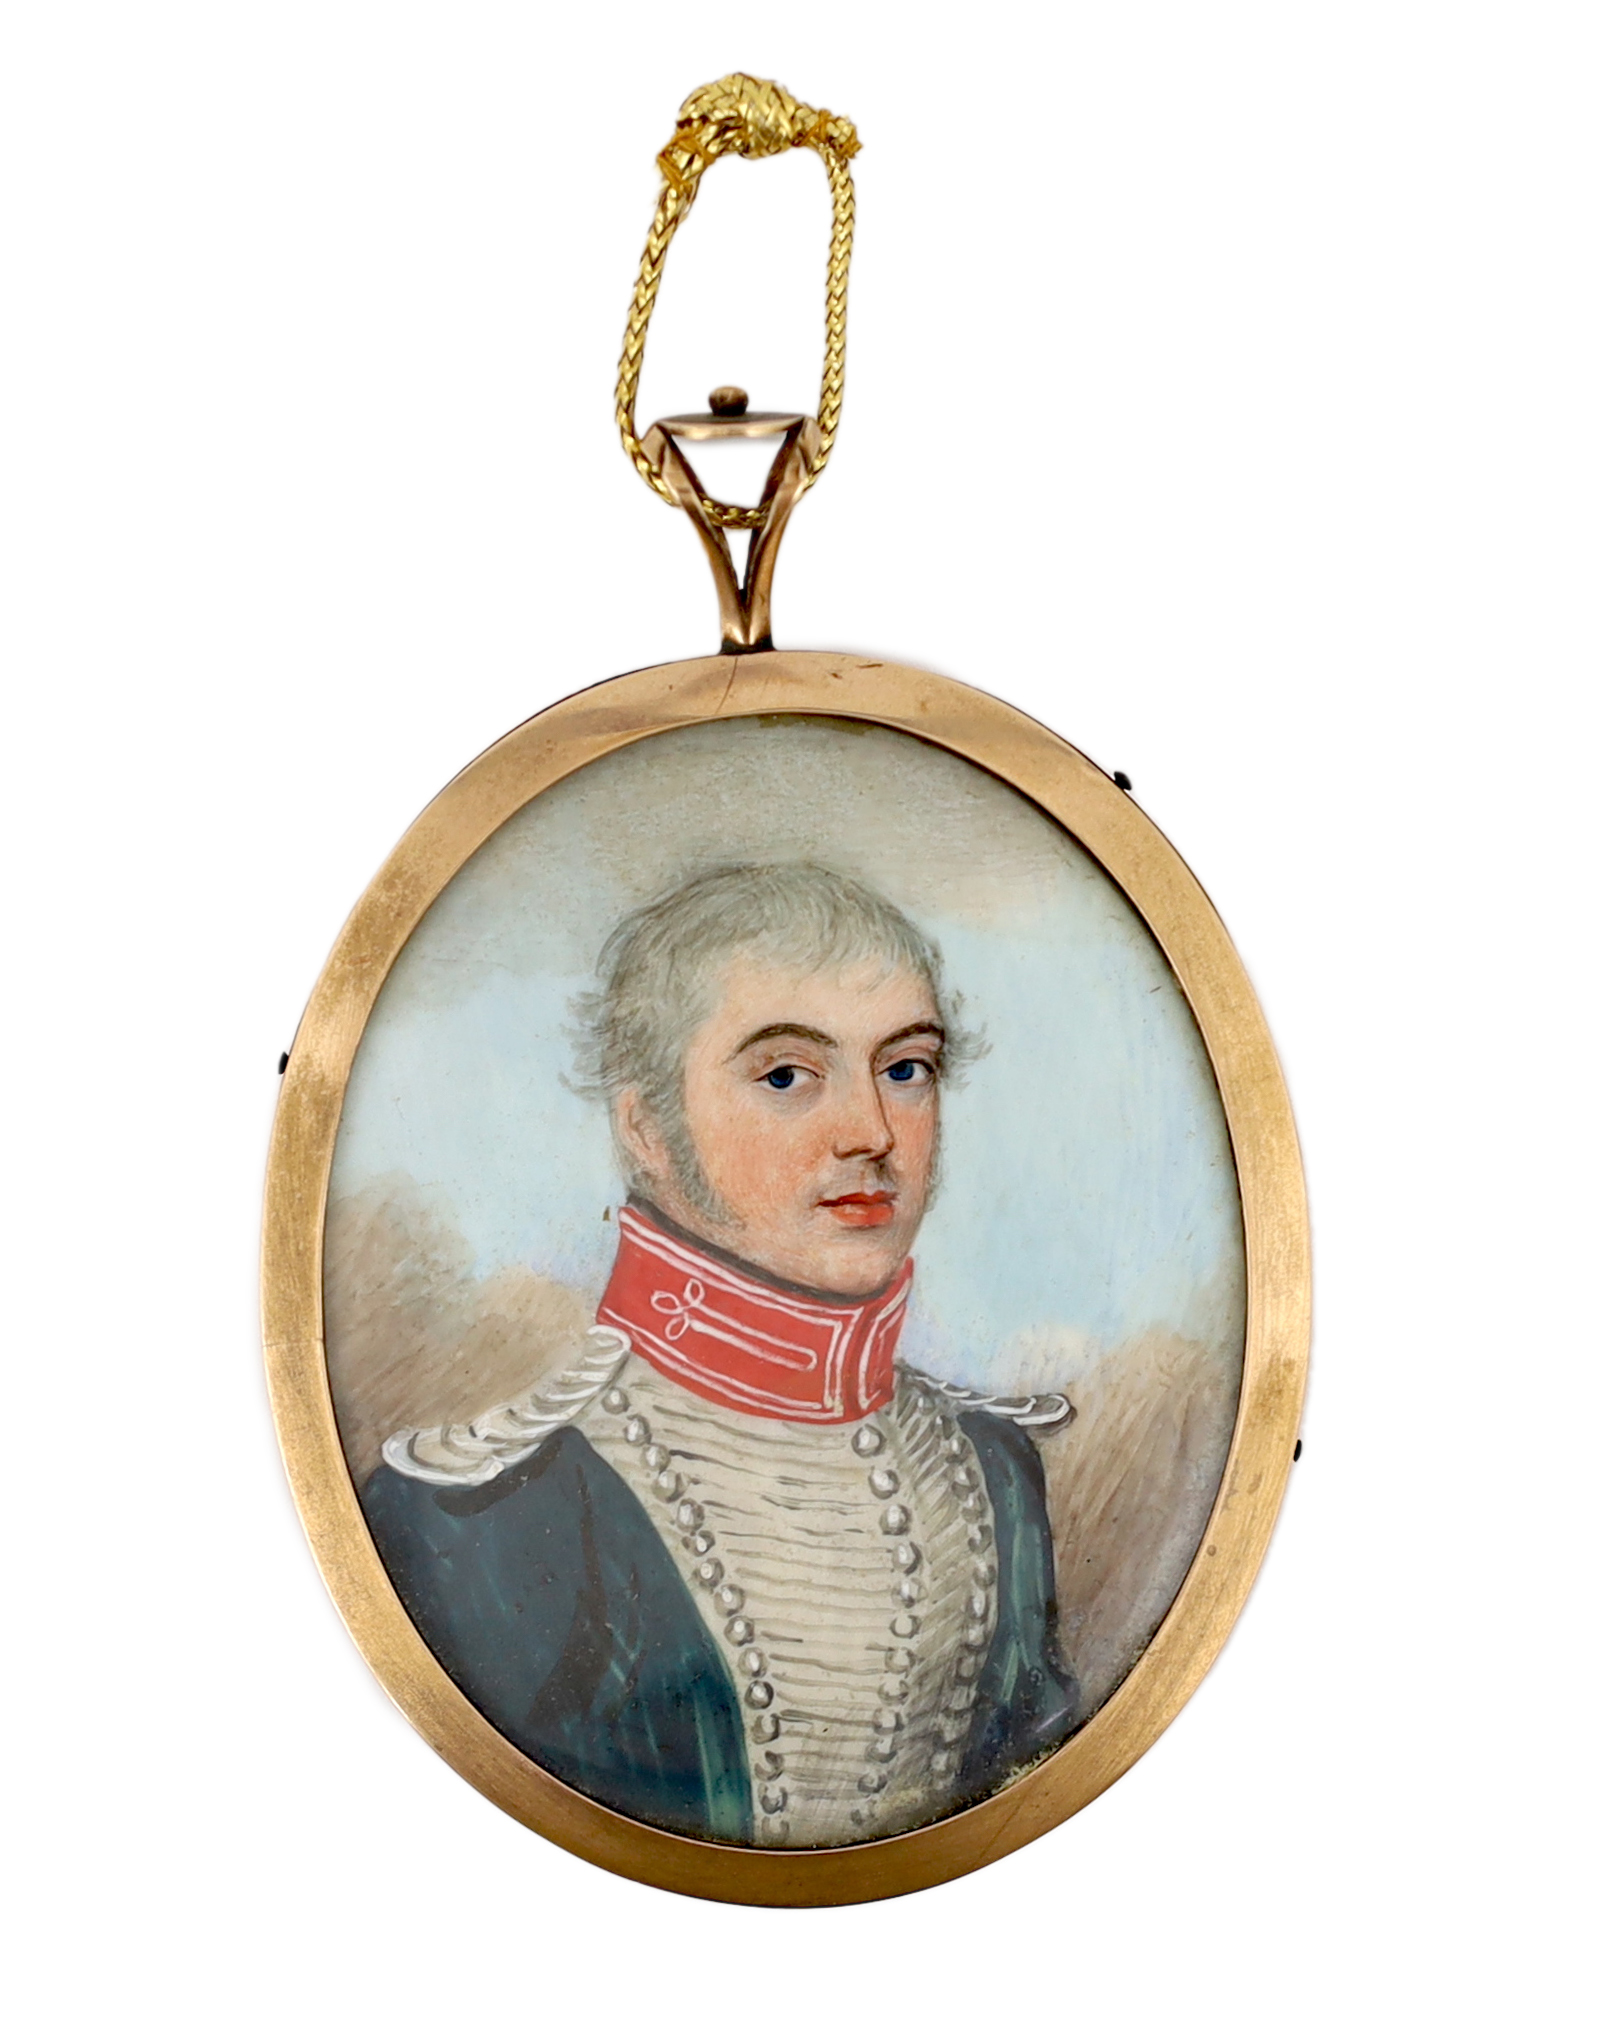 Frederick Buck (Irish, 1771-1840), Portrait miniature of an army officer, watercolour on ivory, 6.1 x 4.8cm. CITES Submission reference XPU4F4CC